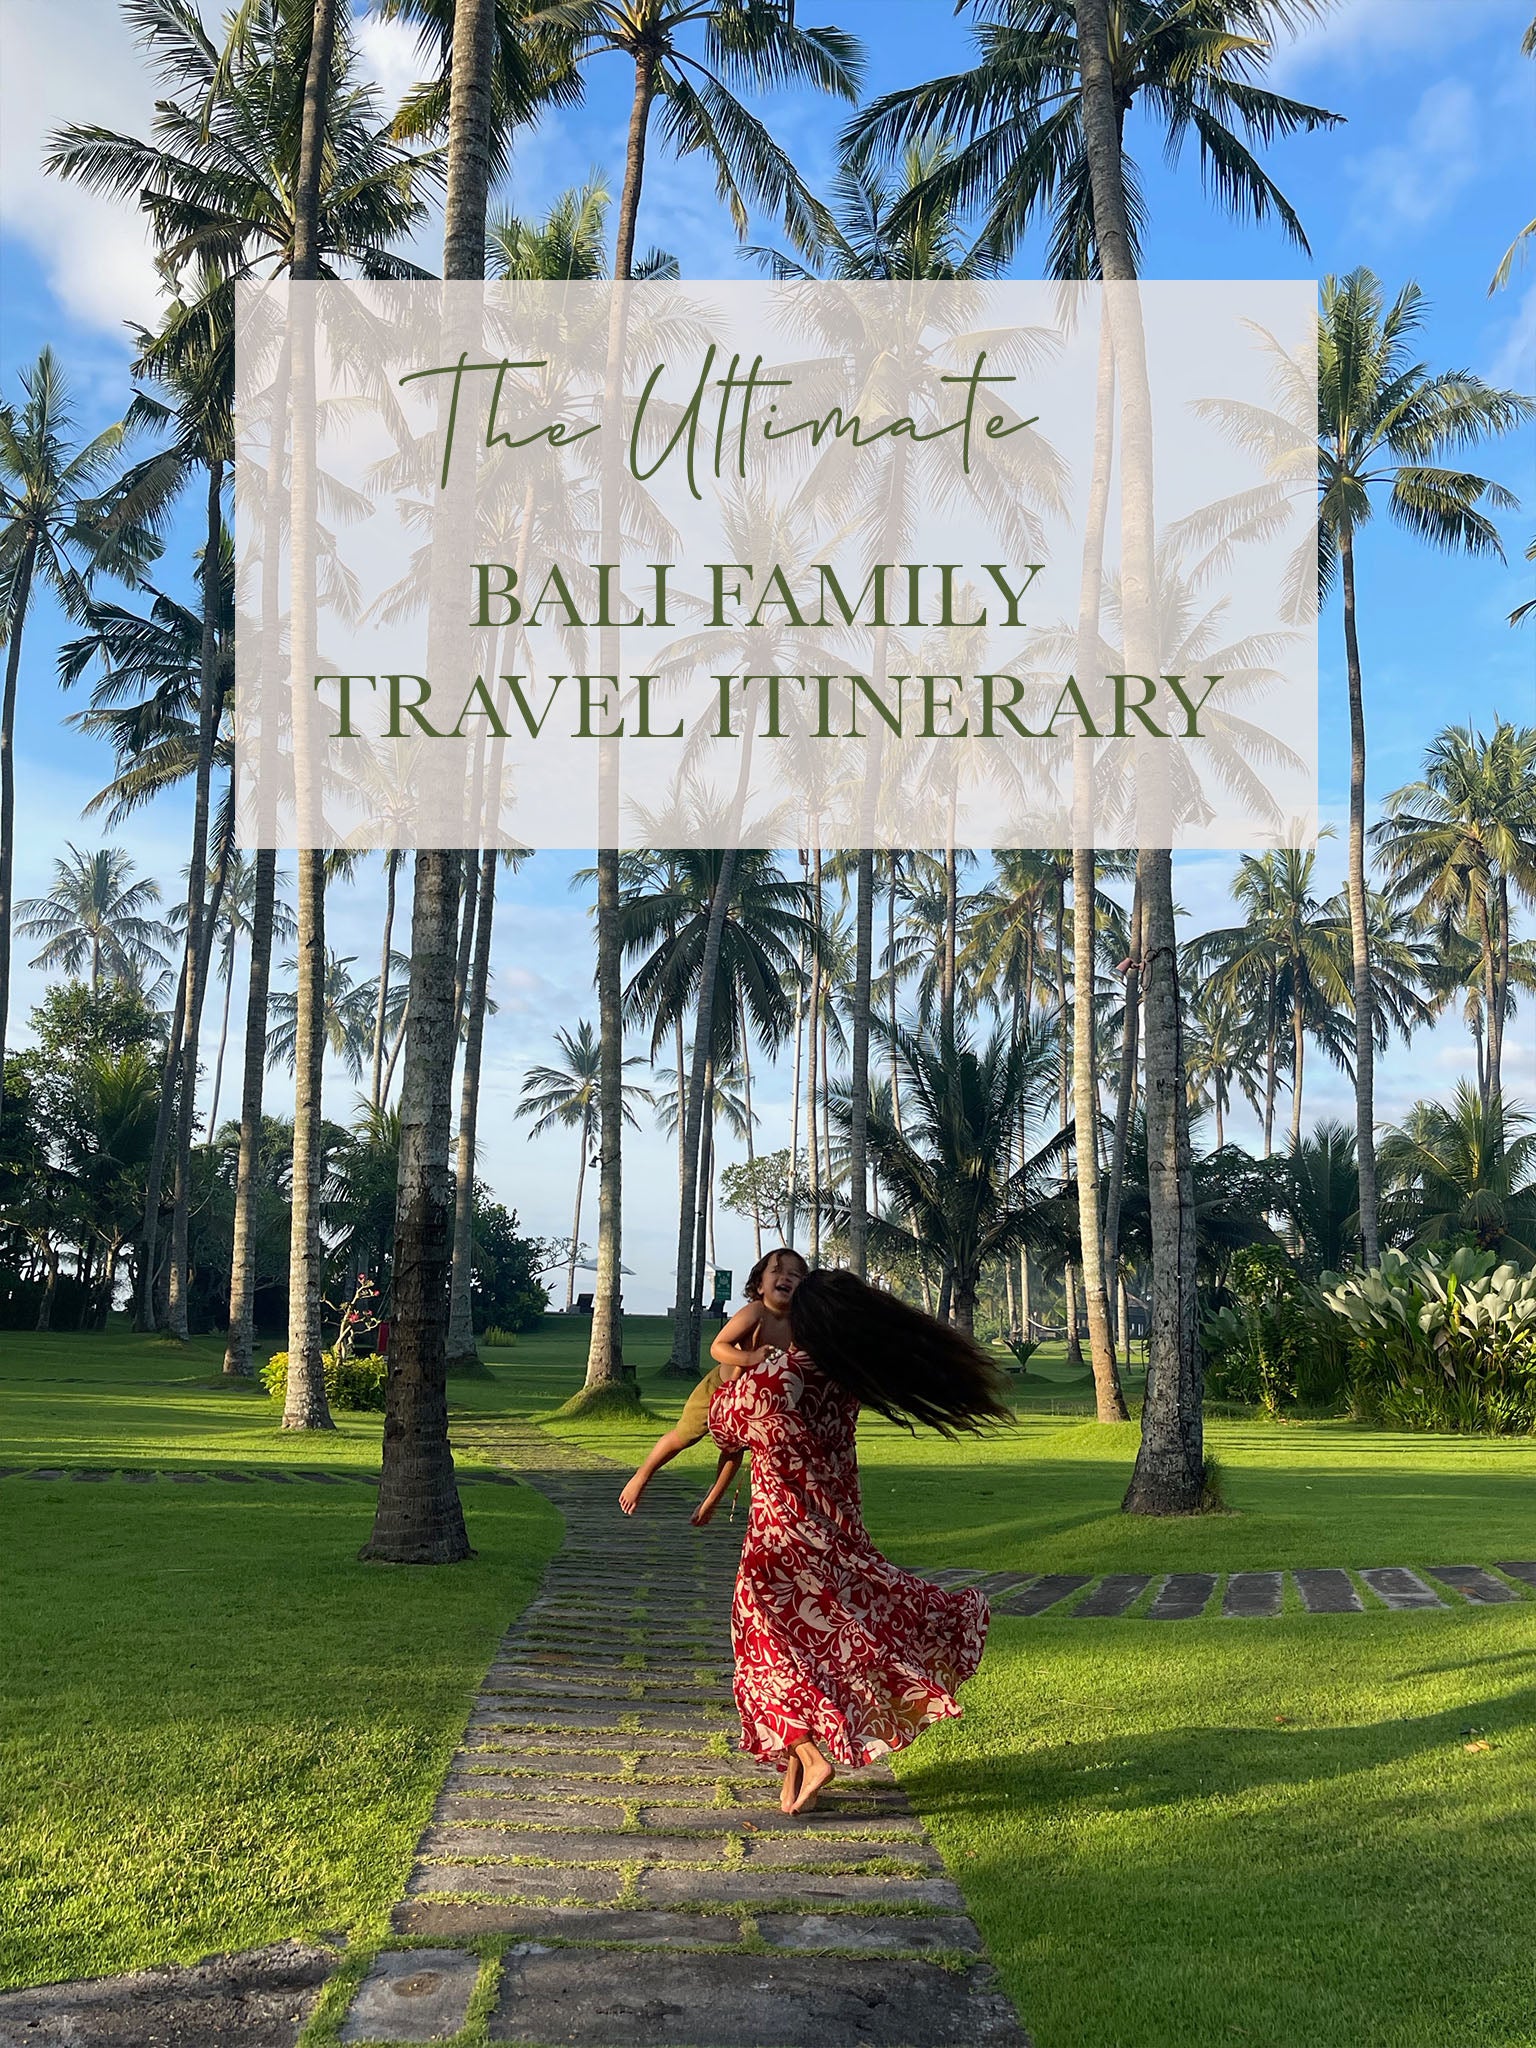 THE ULTIMATE BALI FAMILY TRAVEL ITINERARY